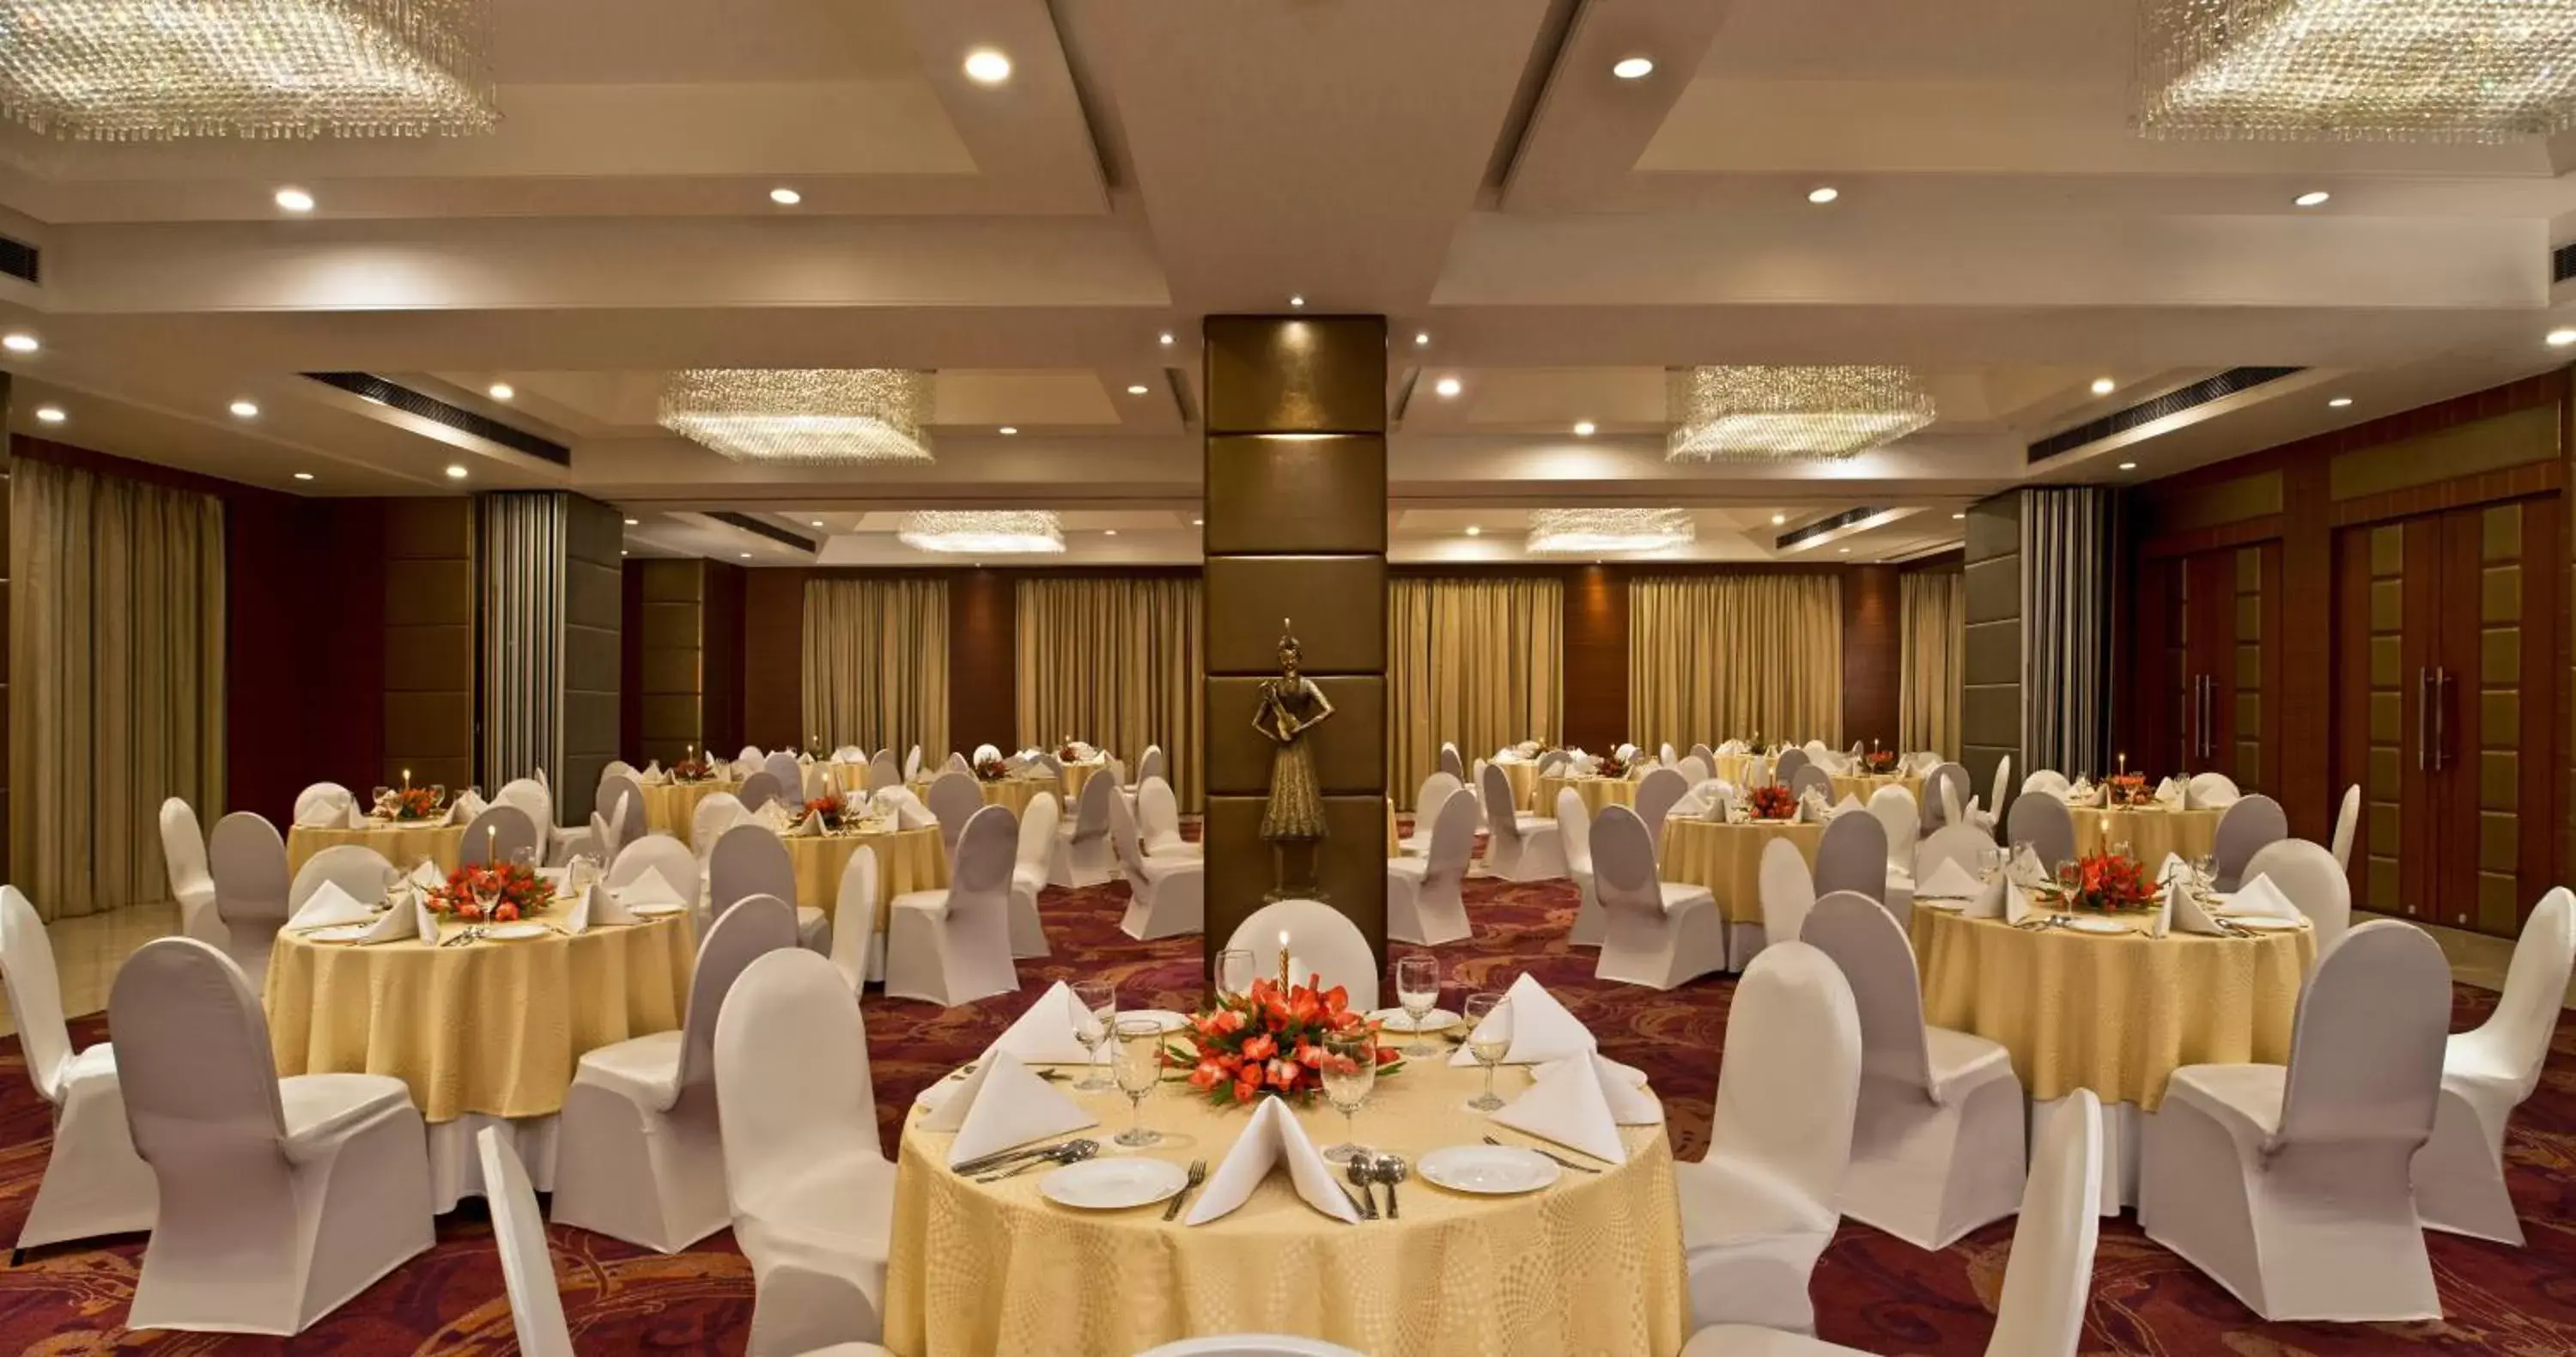 Meeting/conference room, Banquet Facilities in Radisson Jaipur City Center